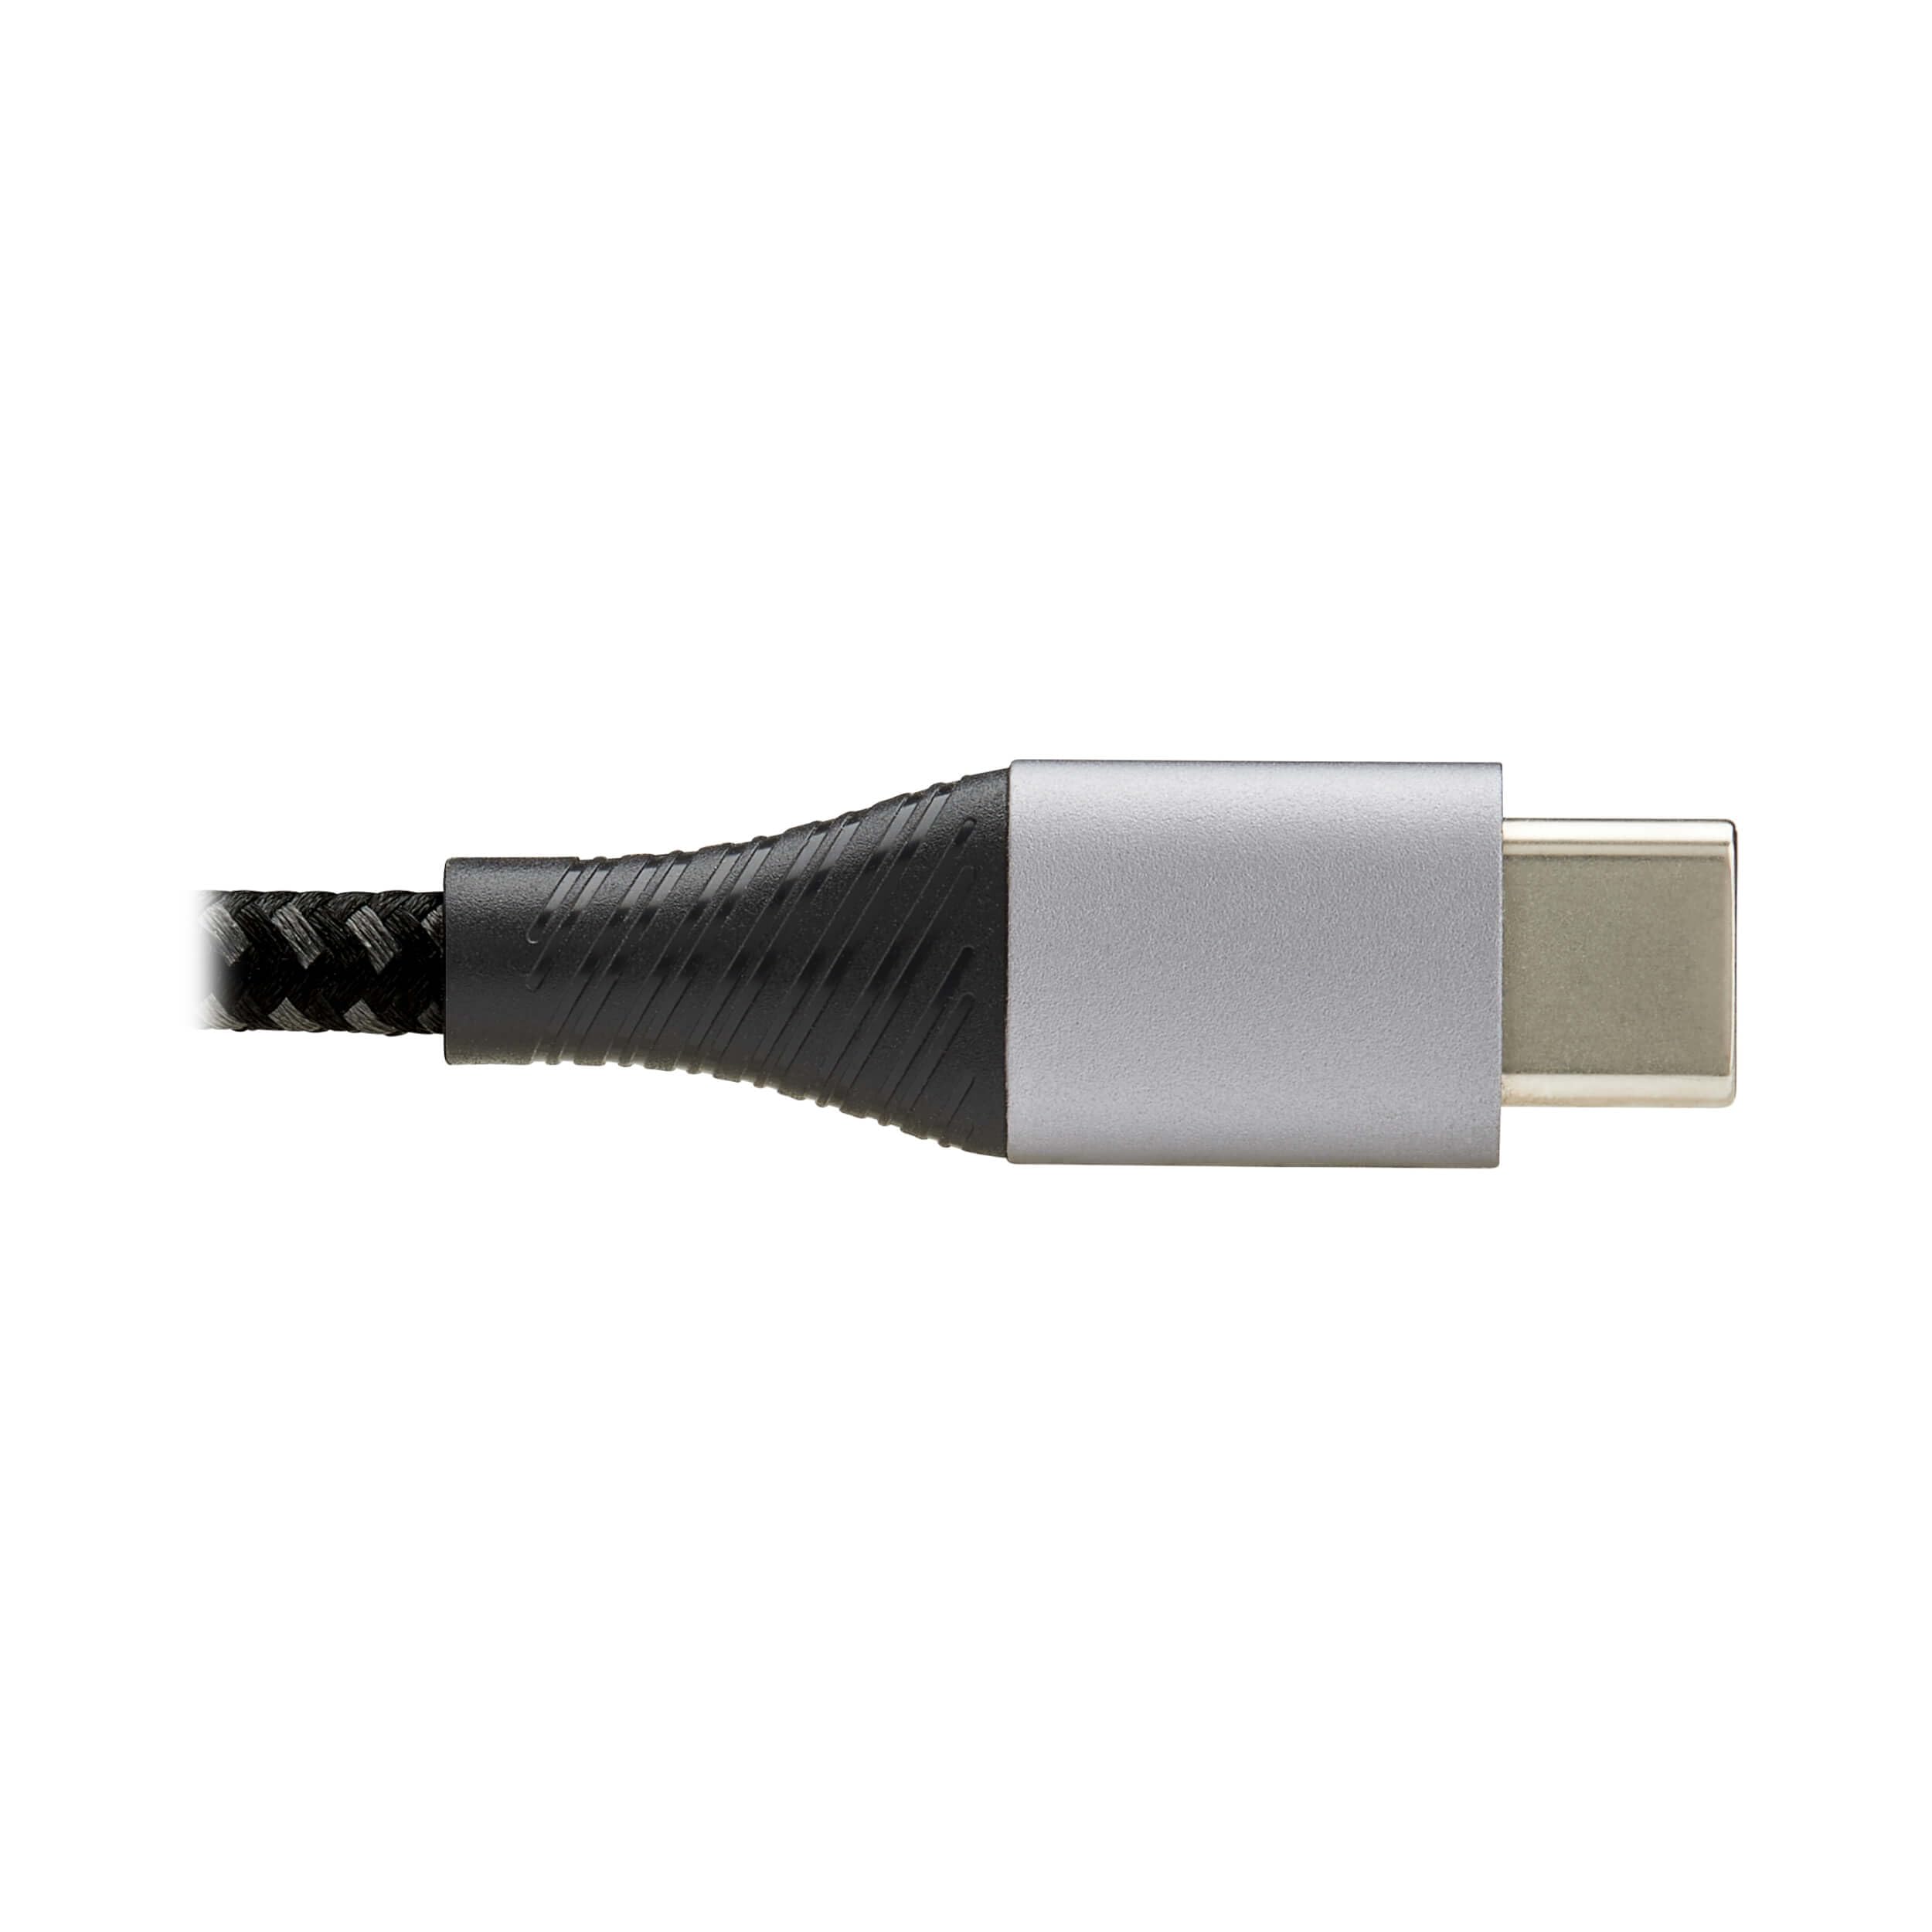 Tripp Lite Dual USB-C Multi-Charging Cable/Splitter, 6 Foot / 1.8 Meter Length, 100W PD Charging, 480 Mbps Data Transfer, Male-to-2x Male, 3-Year Warranty (U420P-2X6-100W)